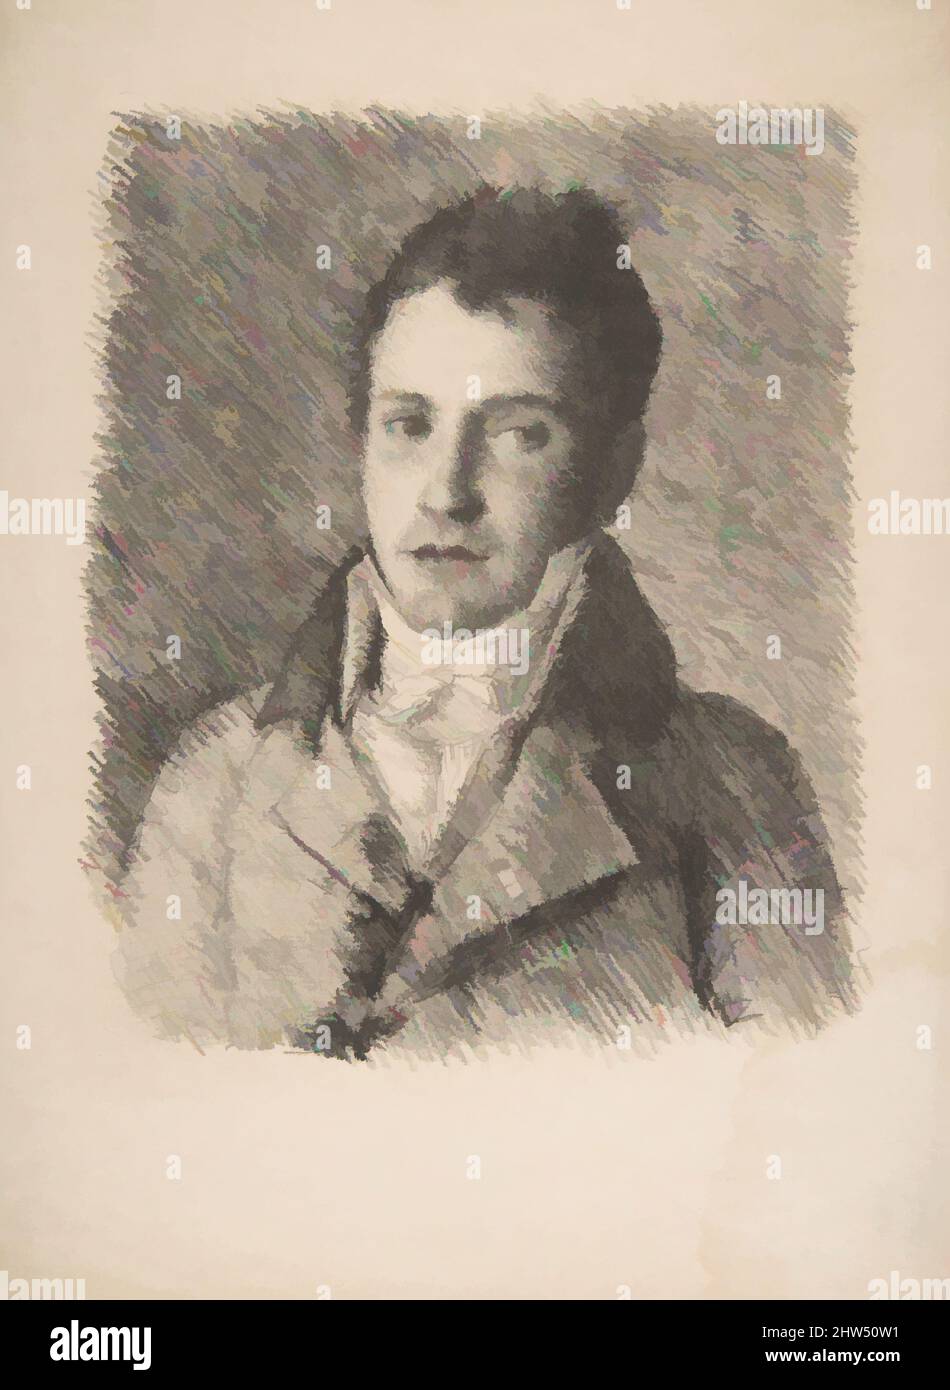 Art inspired by Portrait of a Young Man, ca. 1820, Lithograph, Sheet: 8 7/8 x 7 1/4 in. (22.5 x 18.49cm), Prints, Formerly attributed to Goya (Francisco de Goya y Lucientes) (Spanish, Fuendetodos 1746–1828 Bordeaux, Classic works modernized by Artotop with a splash of modernity. Shapes, color and value, eye-catching visual impact on art. Emotions through freedom of artworks in a contemporary way. A timeless message pursuing a wildly creative new direction. Artists turning to the digital medium and creating the Artotop NFT Stock Photo